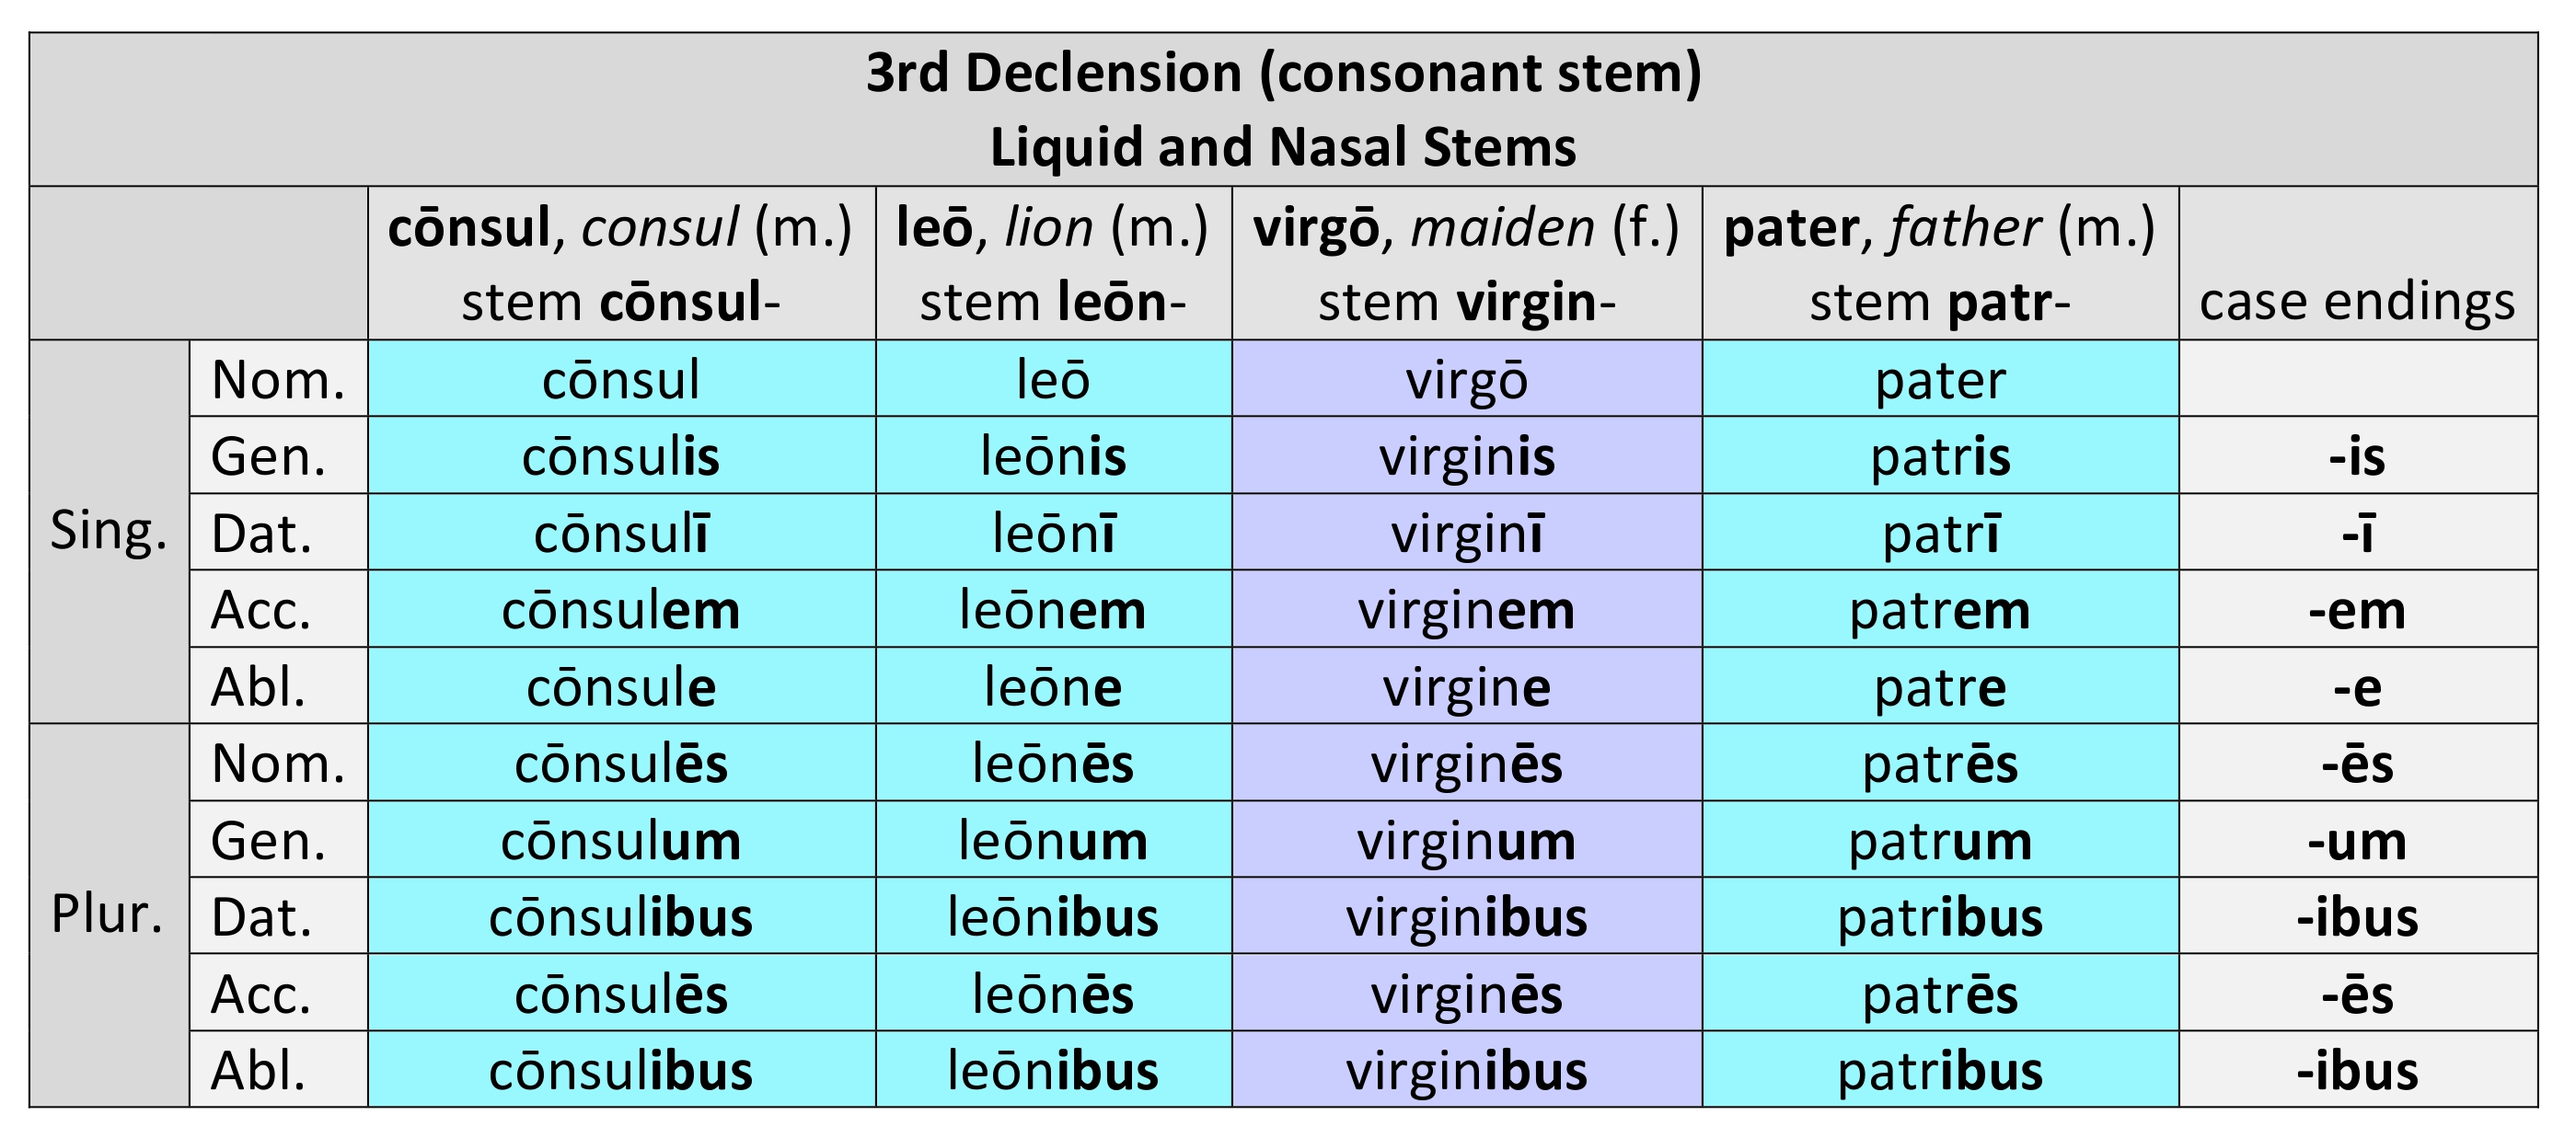 Paradigm for 3rd Declension masculine and feminine liquid and nasal stem nouns